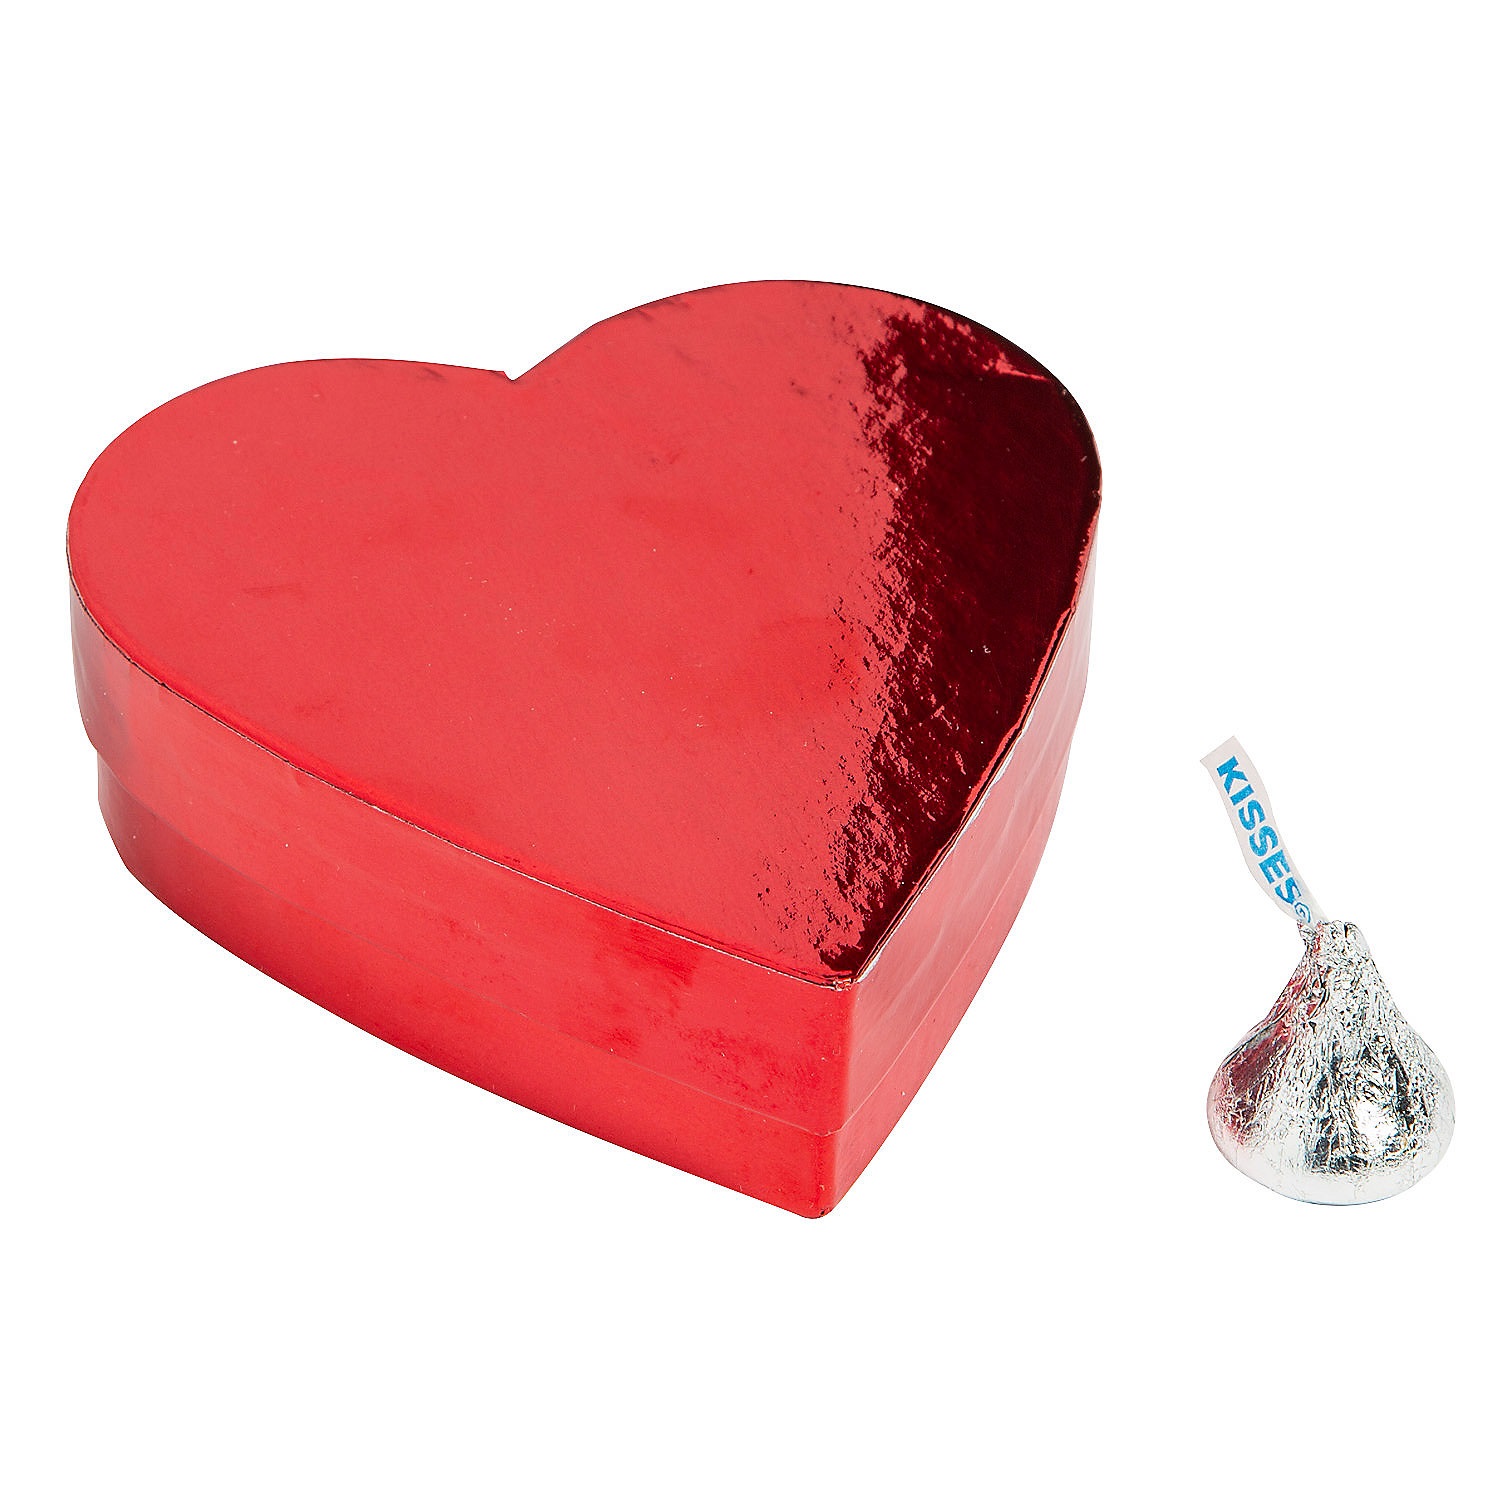 red-heart-shaped-favor-boxes-12-pc-_14095480